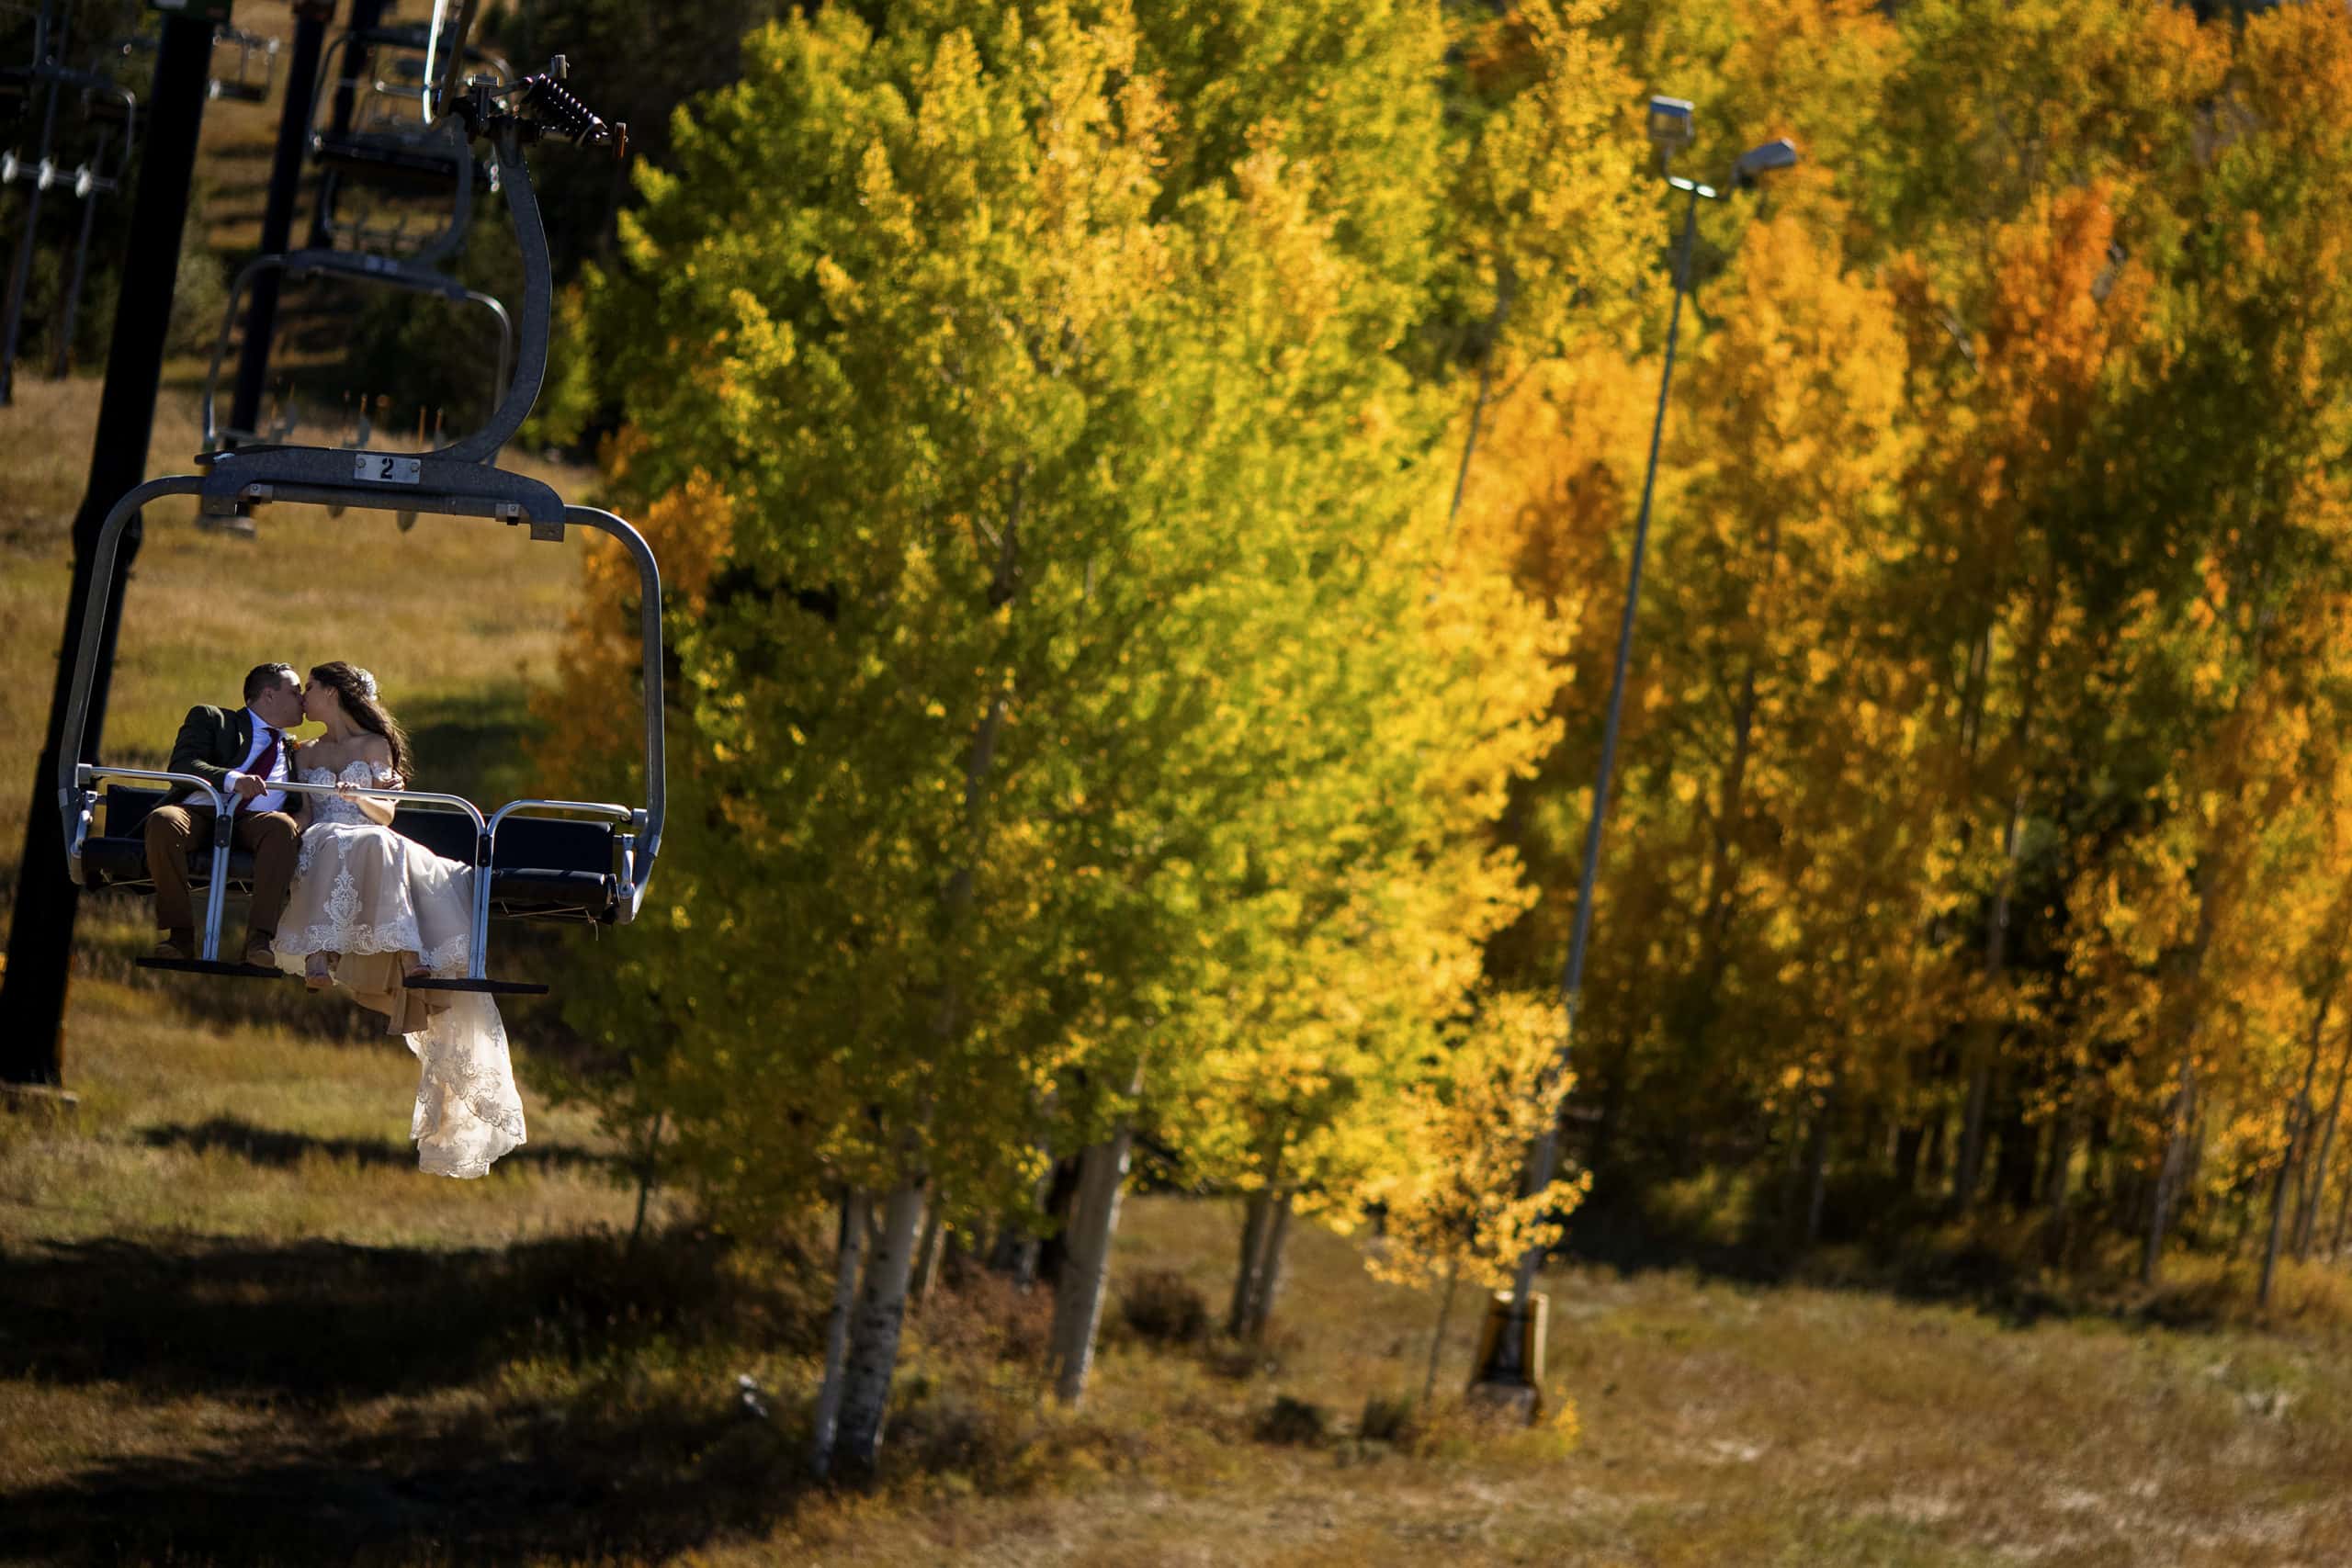 The bride and groom share a kiss on the Quick Draw Express chairlift near a grove of colorful aspen trees following their elopement ceremony